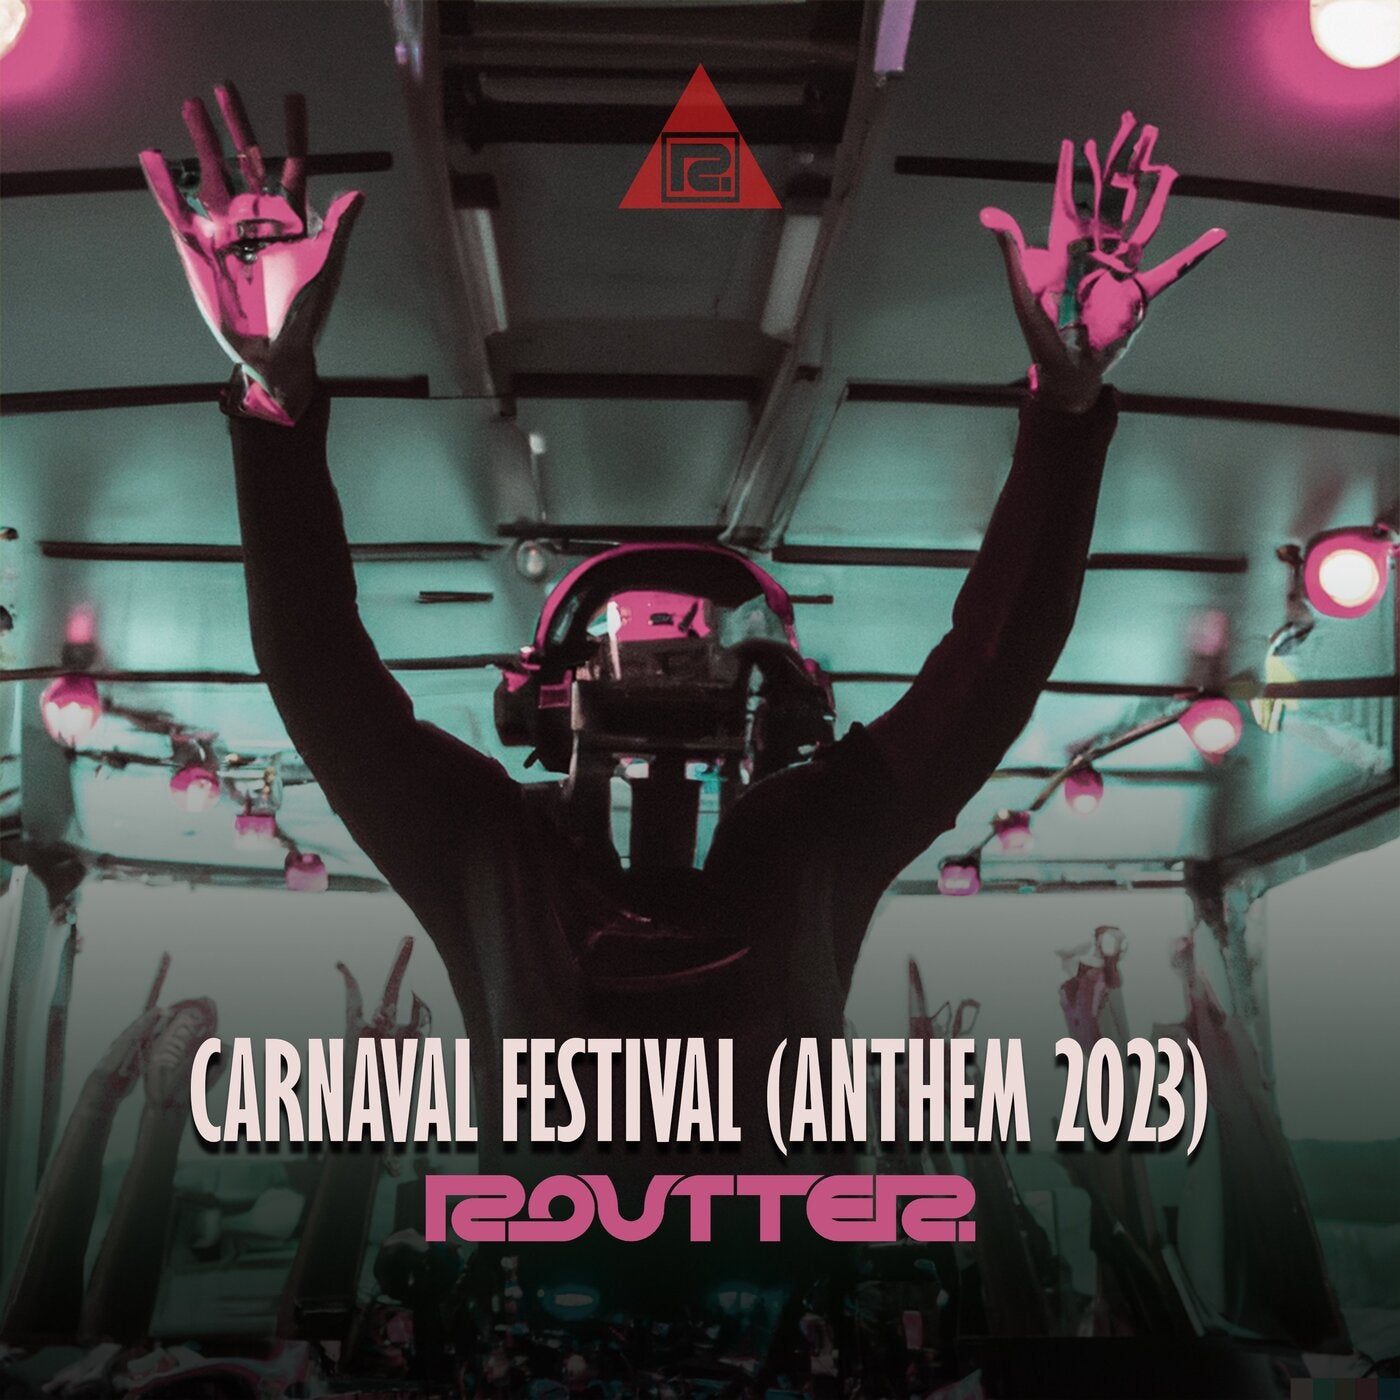 Carnaval Festival (Anthem 2023 Extended Mix) by Routter on Beatport